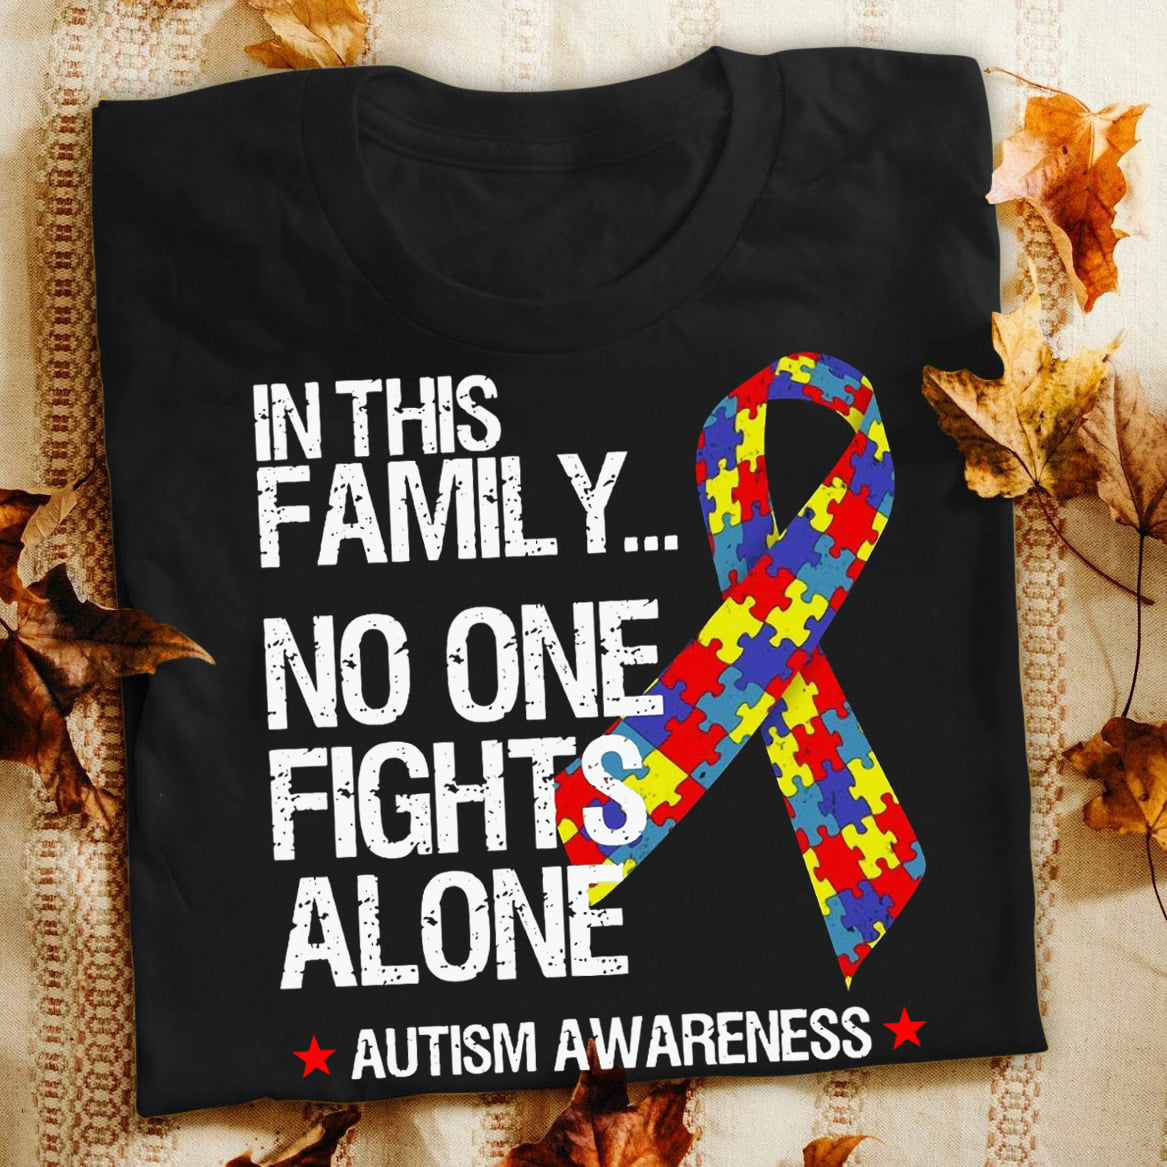 In this family no one fights alone - Autism awareness